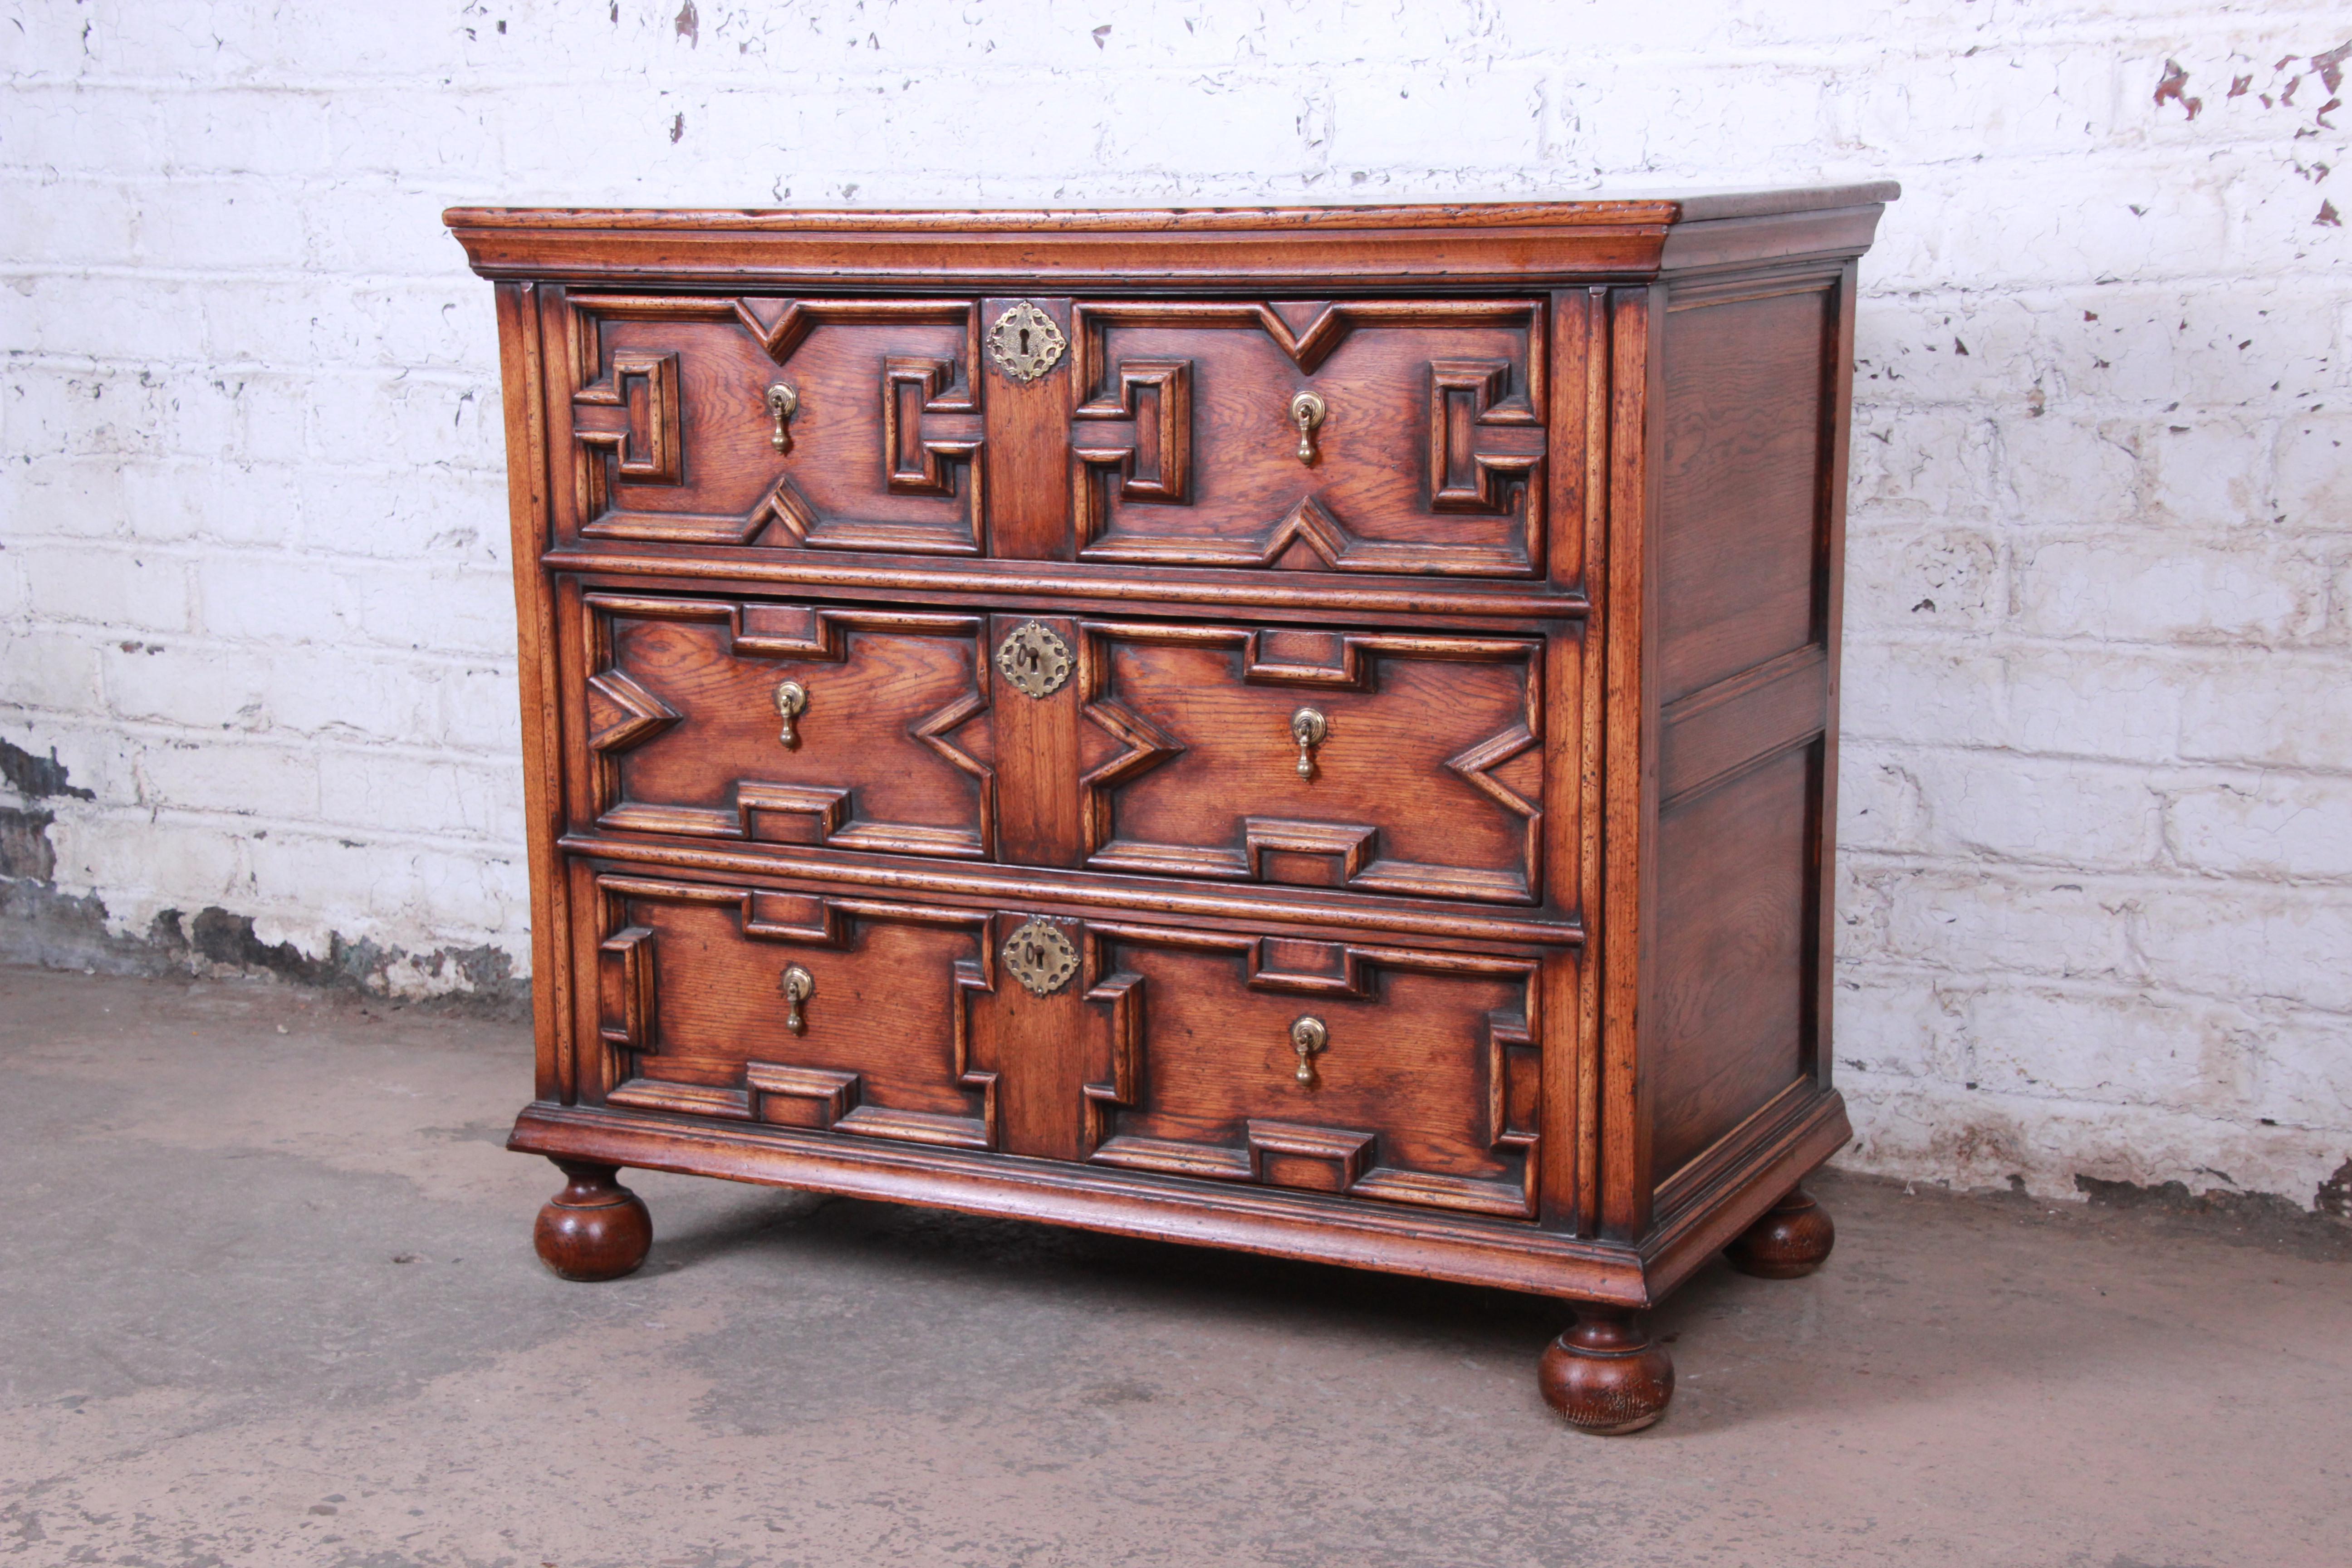 Offering a very nice and unique solid oak three drawer dresser or bachelor chest The chest has nice ornate carved details with three large sturdy drawers with tear drop brass pulls and decor. The bottom two drawers come with two locking keys. The